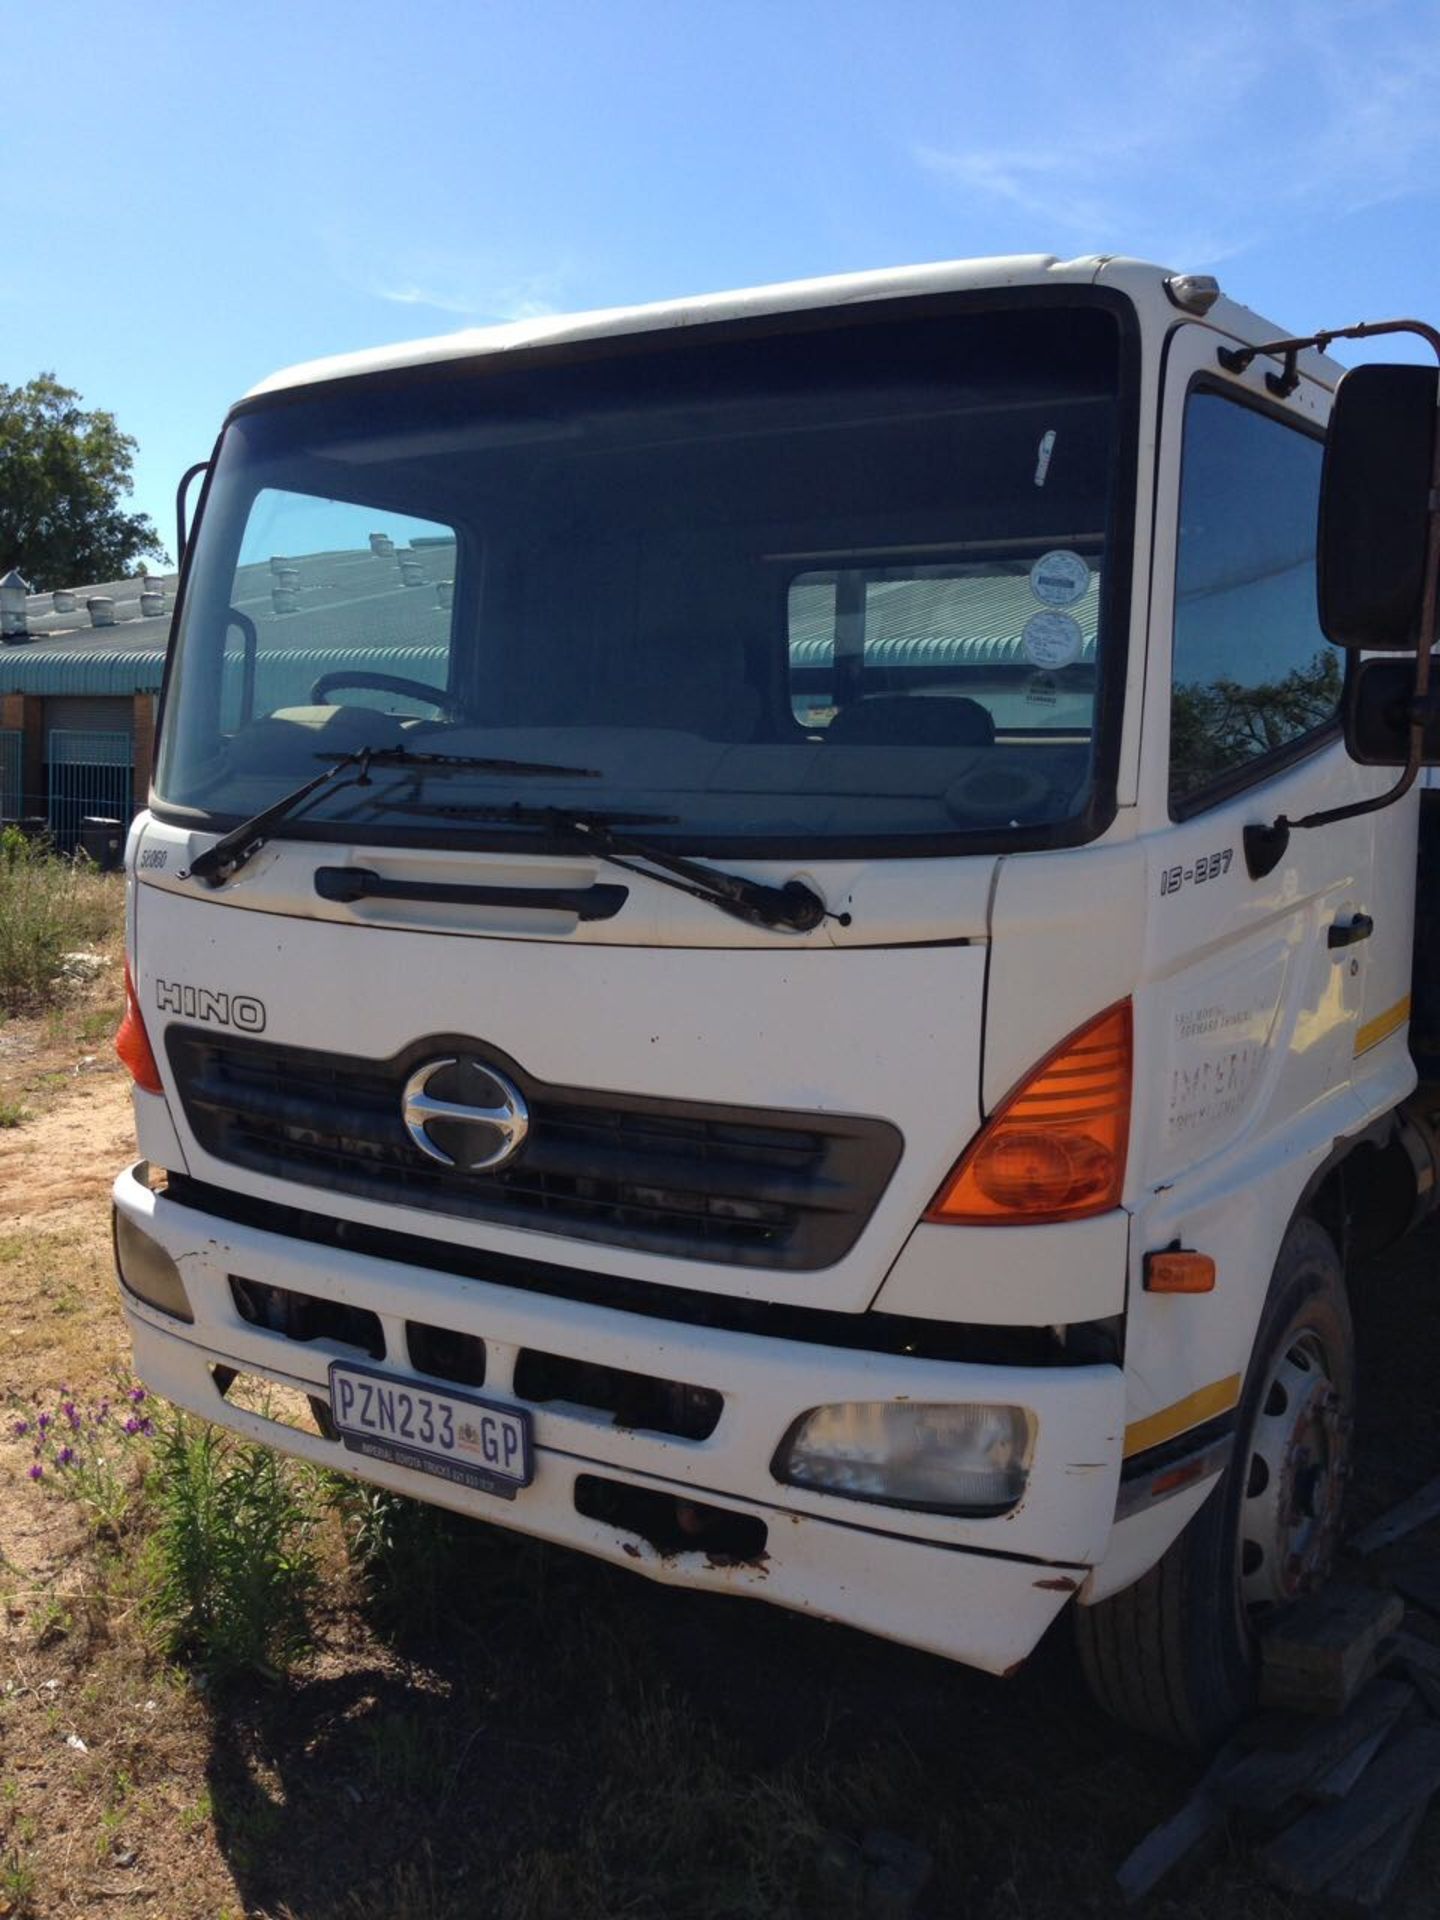 2004 TOYOTA HINO 15-257 D/SIDE (NON-RUNNER) - (PZN233GP) - Image 2 of 11